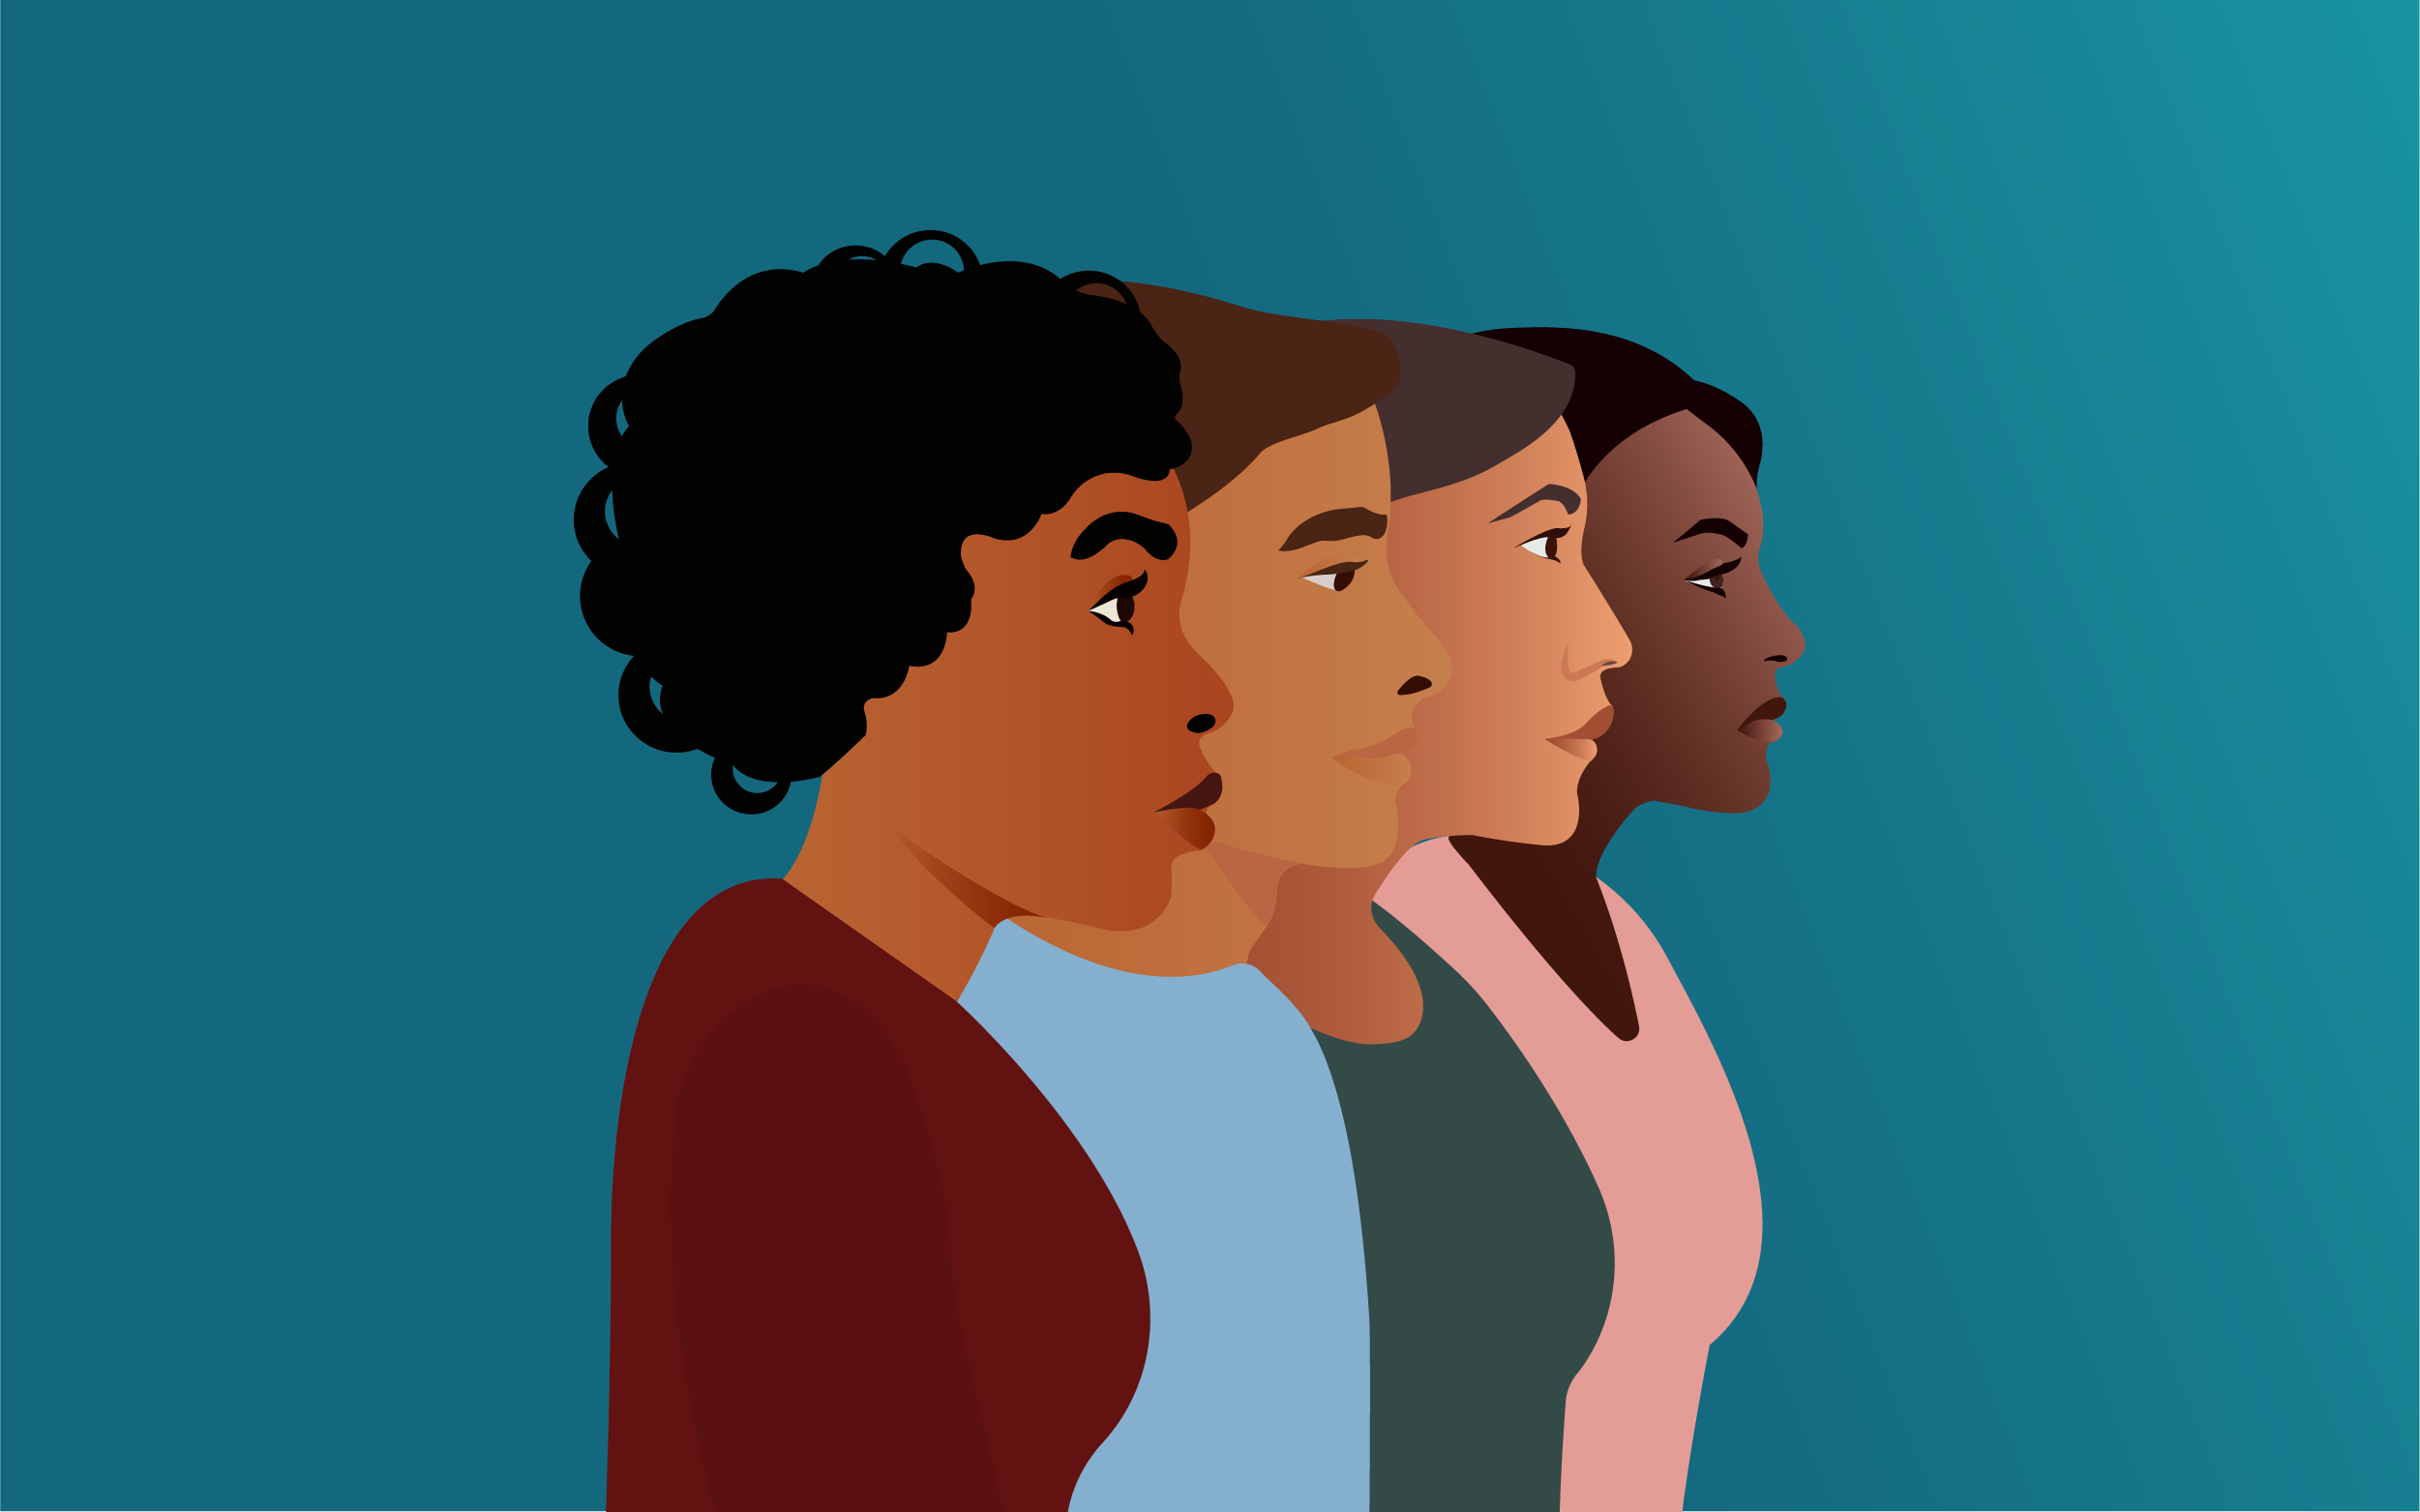 Four BIPOC employees in profile. Illustration.